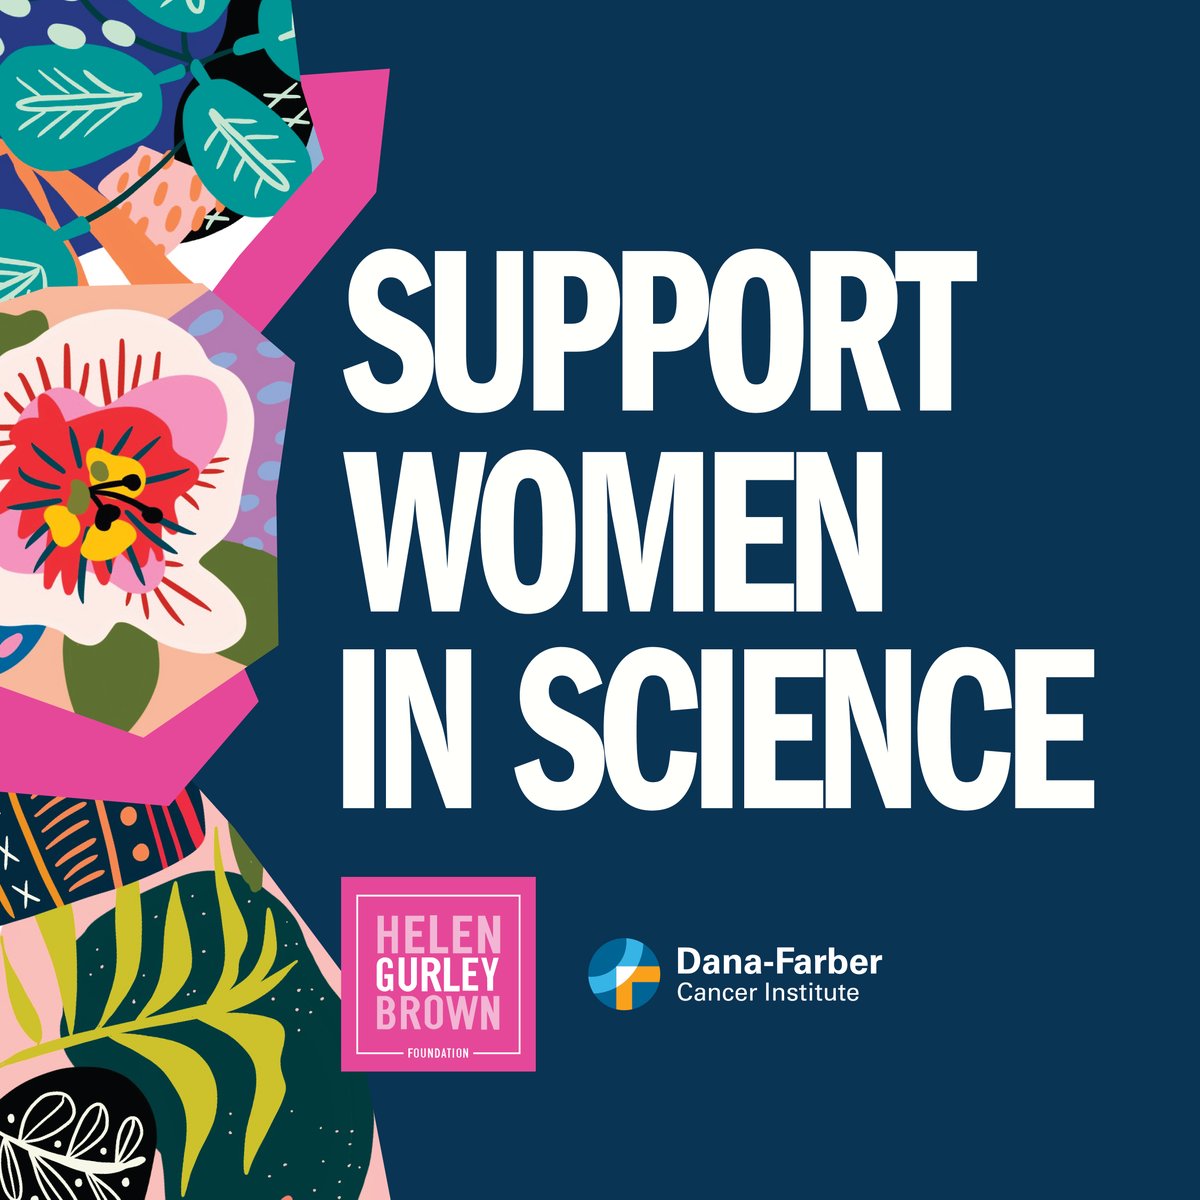 Join us in-person or virtually on 6/5 from 2–3:15 pm for the Helen Gurley Brown Presidential Summit on Women and Science. Hear from prominent leaders in science, celebrate & support women in research and medicine, and engage in a dynamic Q&A session. jimmyfund.gives/zme94ork